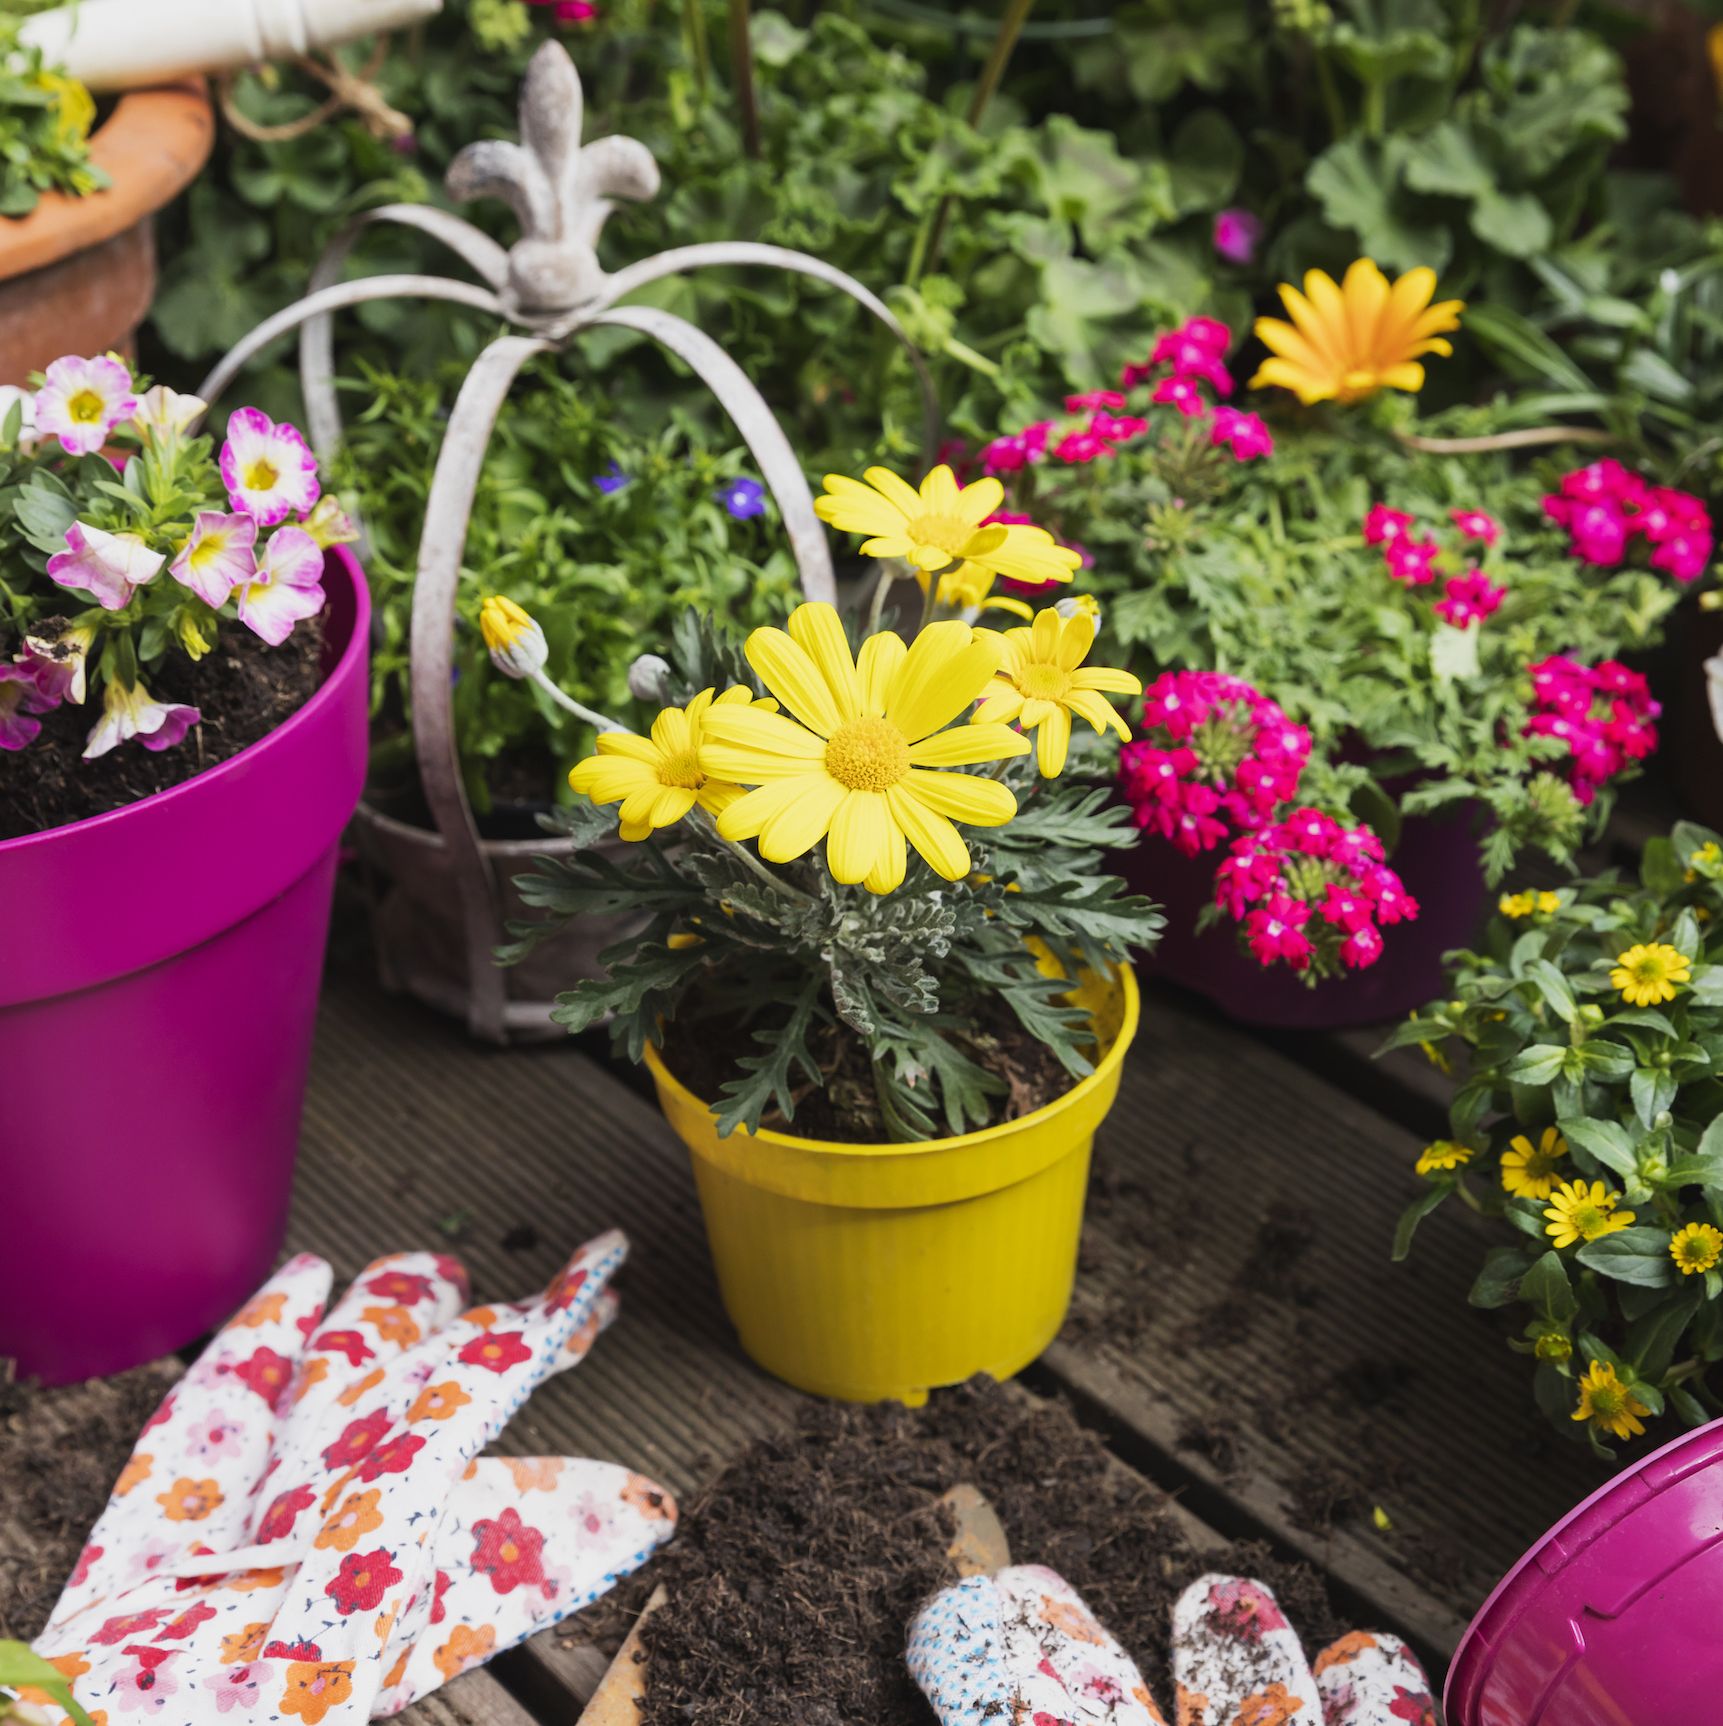 7 surprising mental and physical benefits of gardening